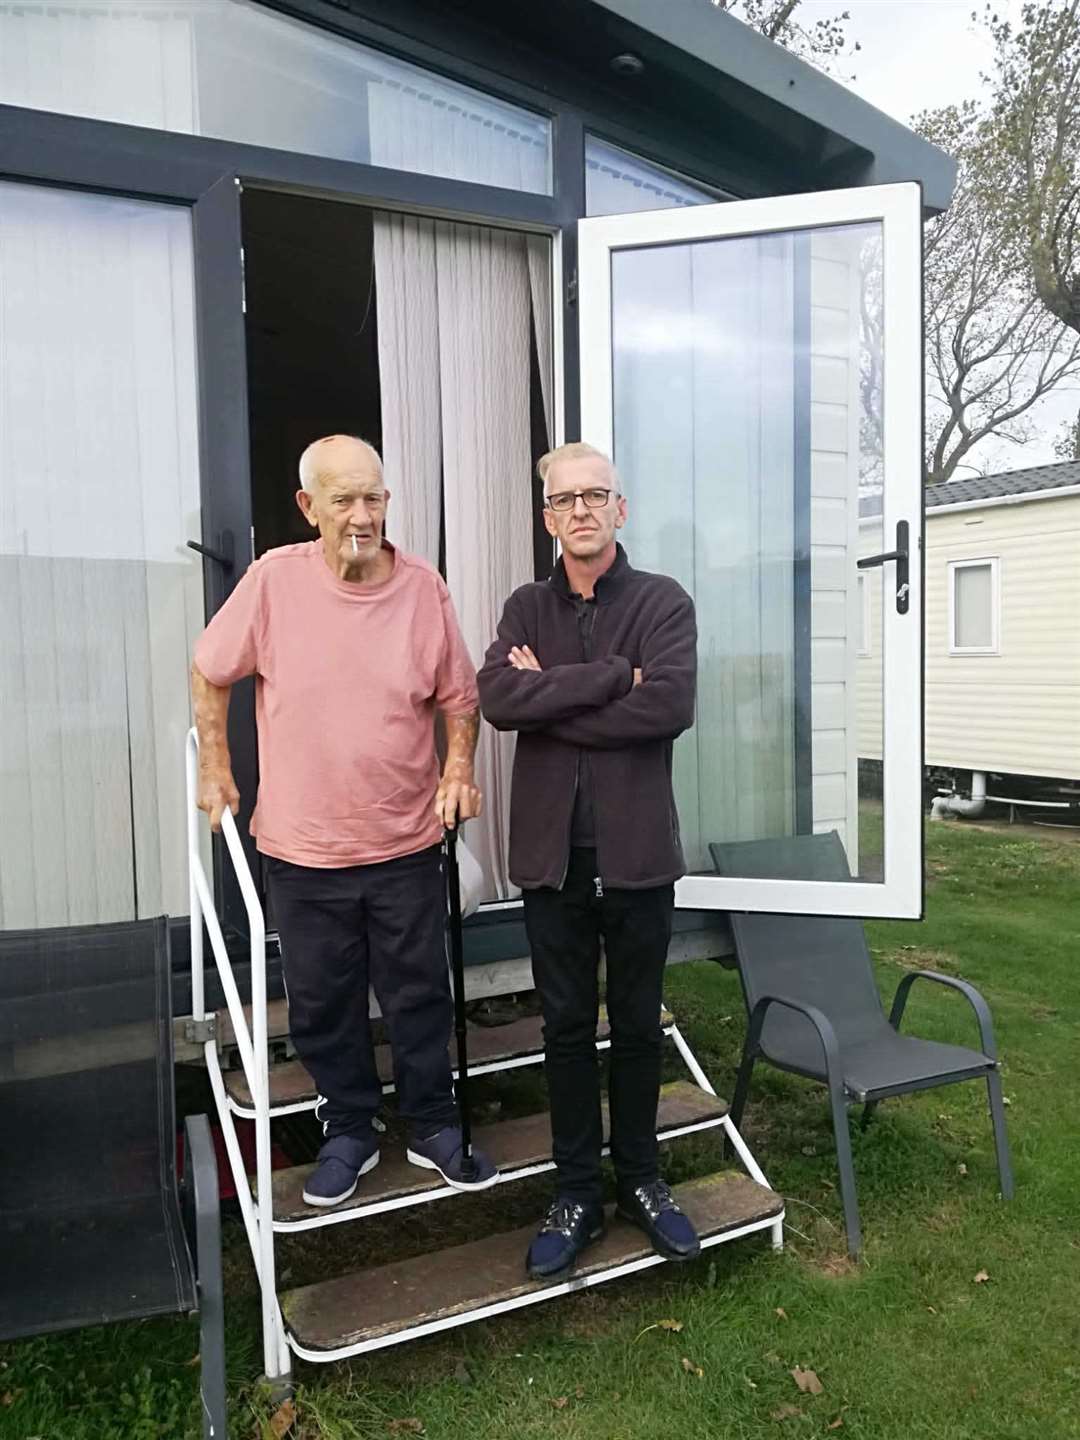 Brian Kirton, 81, left, who has cancer and dementia, is being made homeless with his son Mathew Kirton, 42, after being evicted from their home at Ashcroft Coast in Minster